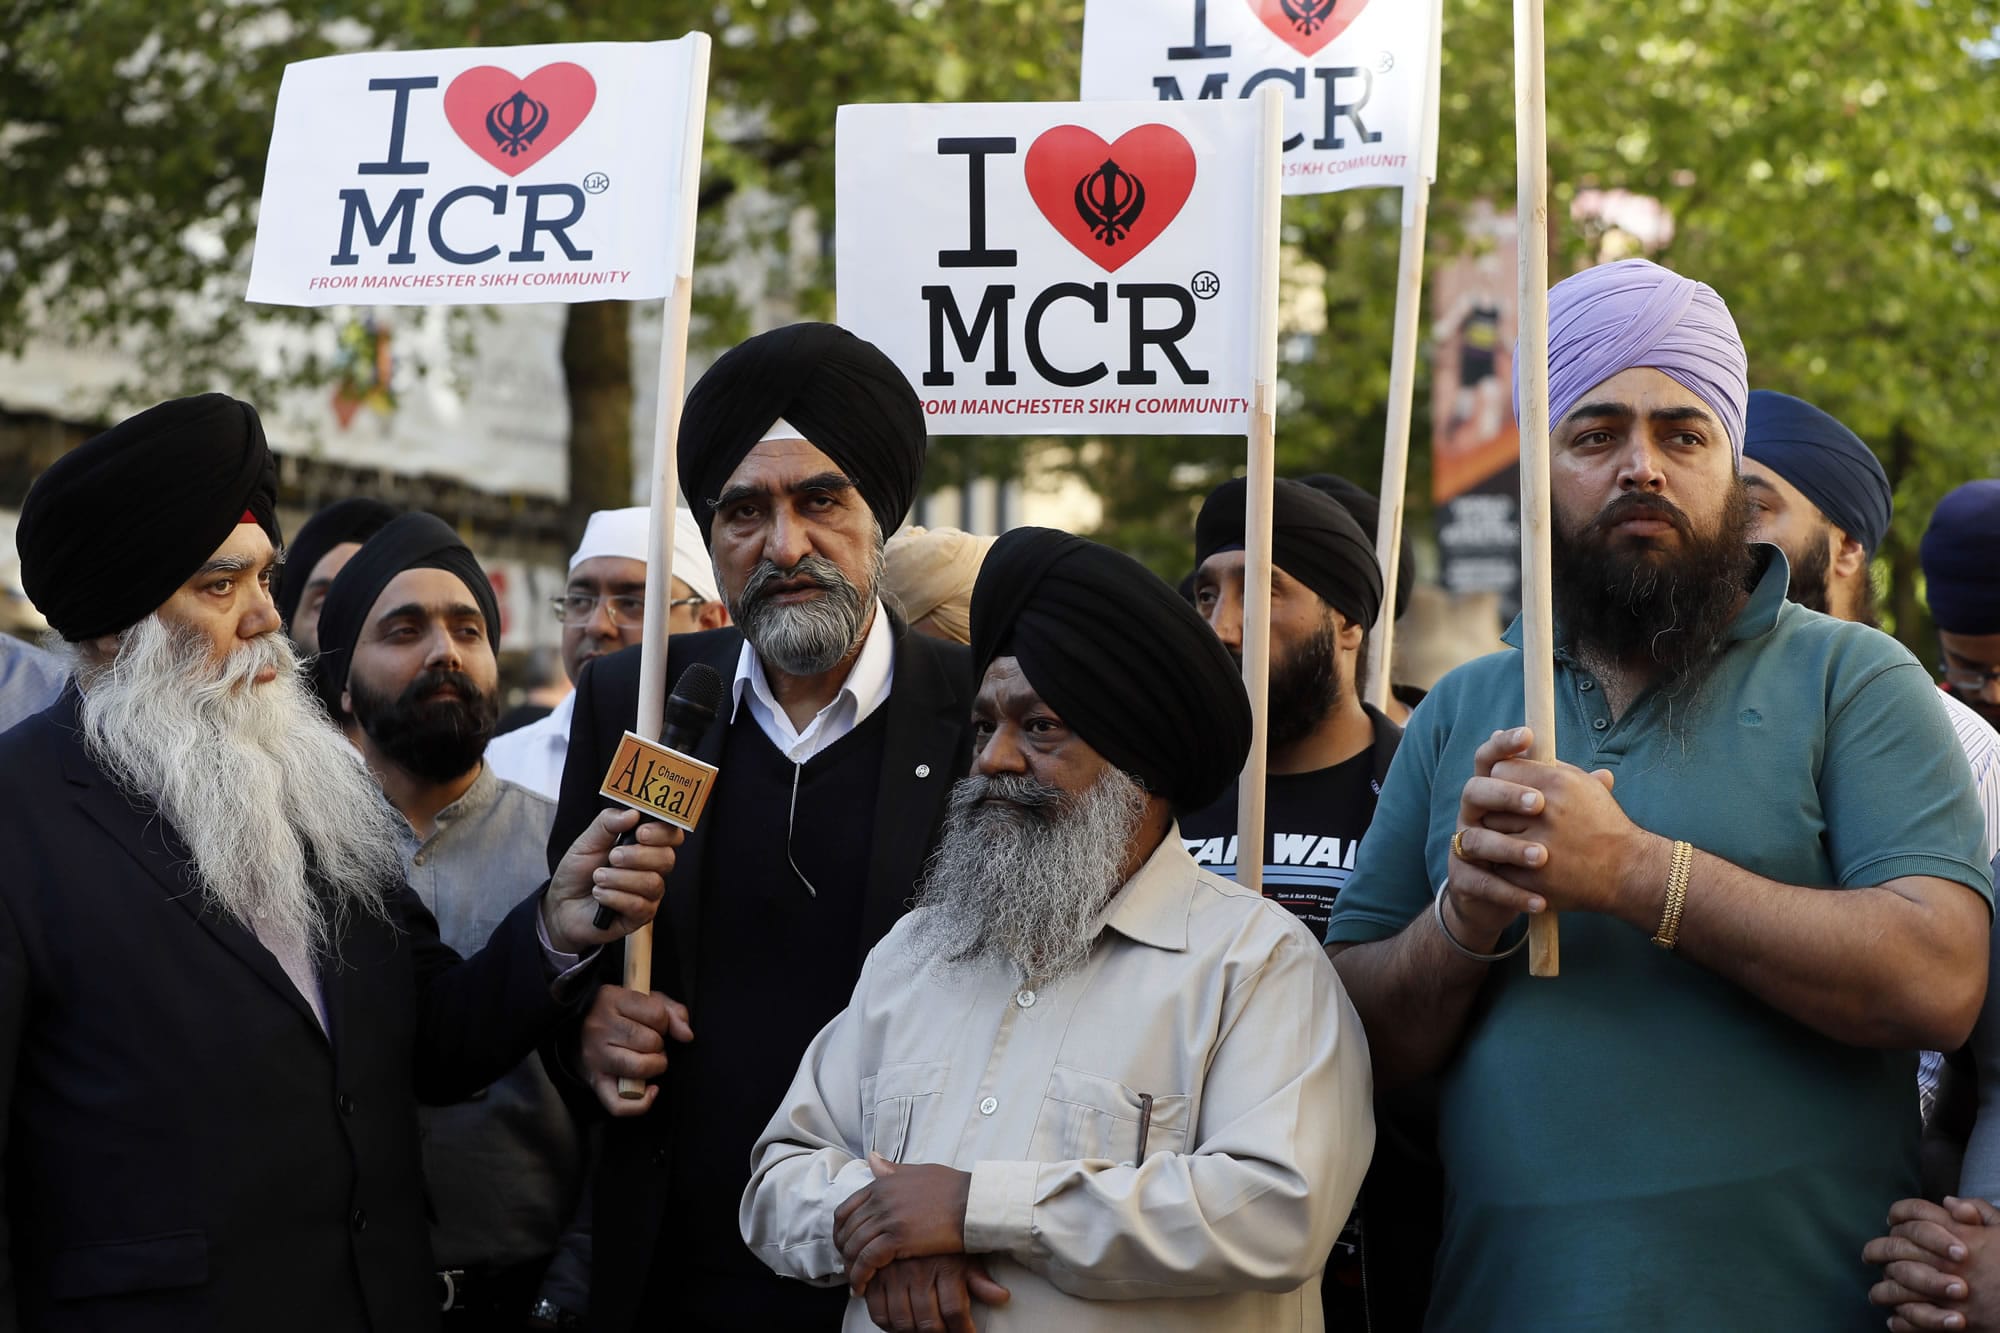 Members of the Manchester Sikh Community attend a vigil in Albert Square, Manchester, England, Tuesday May 23, 2017, the day after the suicide attack at an Ariana Grande concert that left 22 people dead as it ended on Monday night.